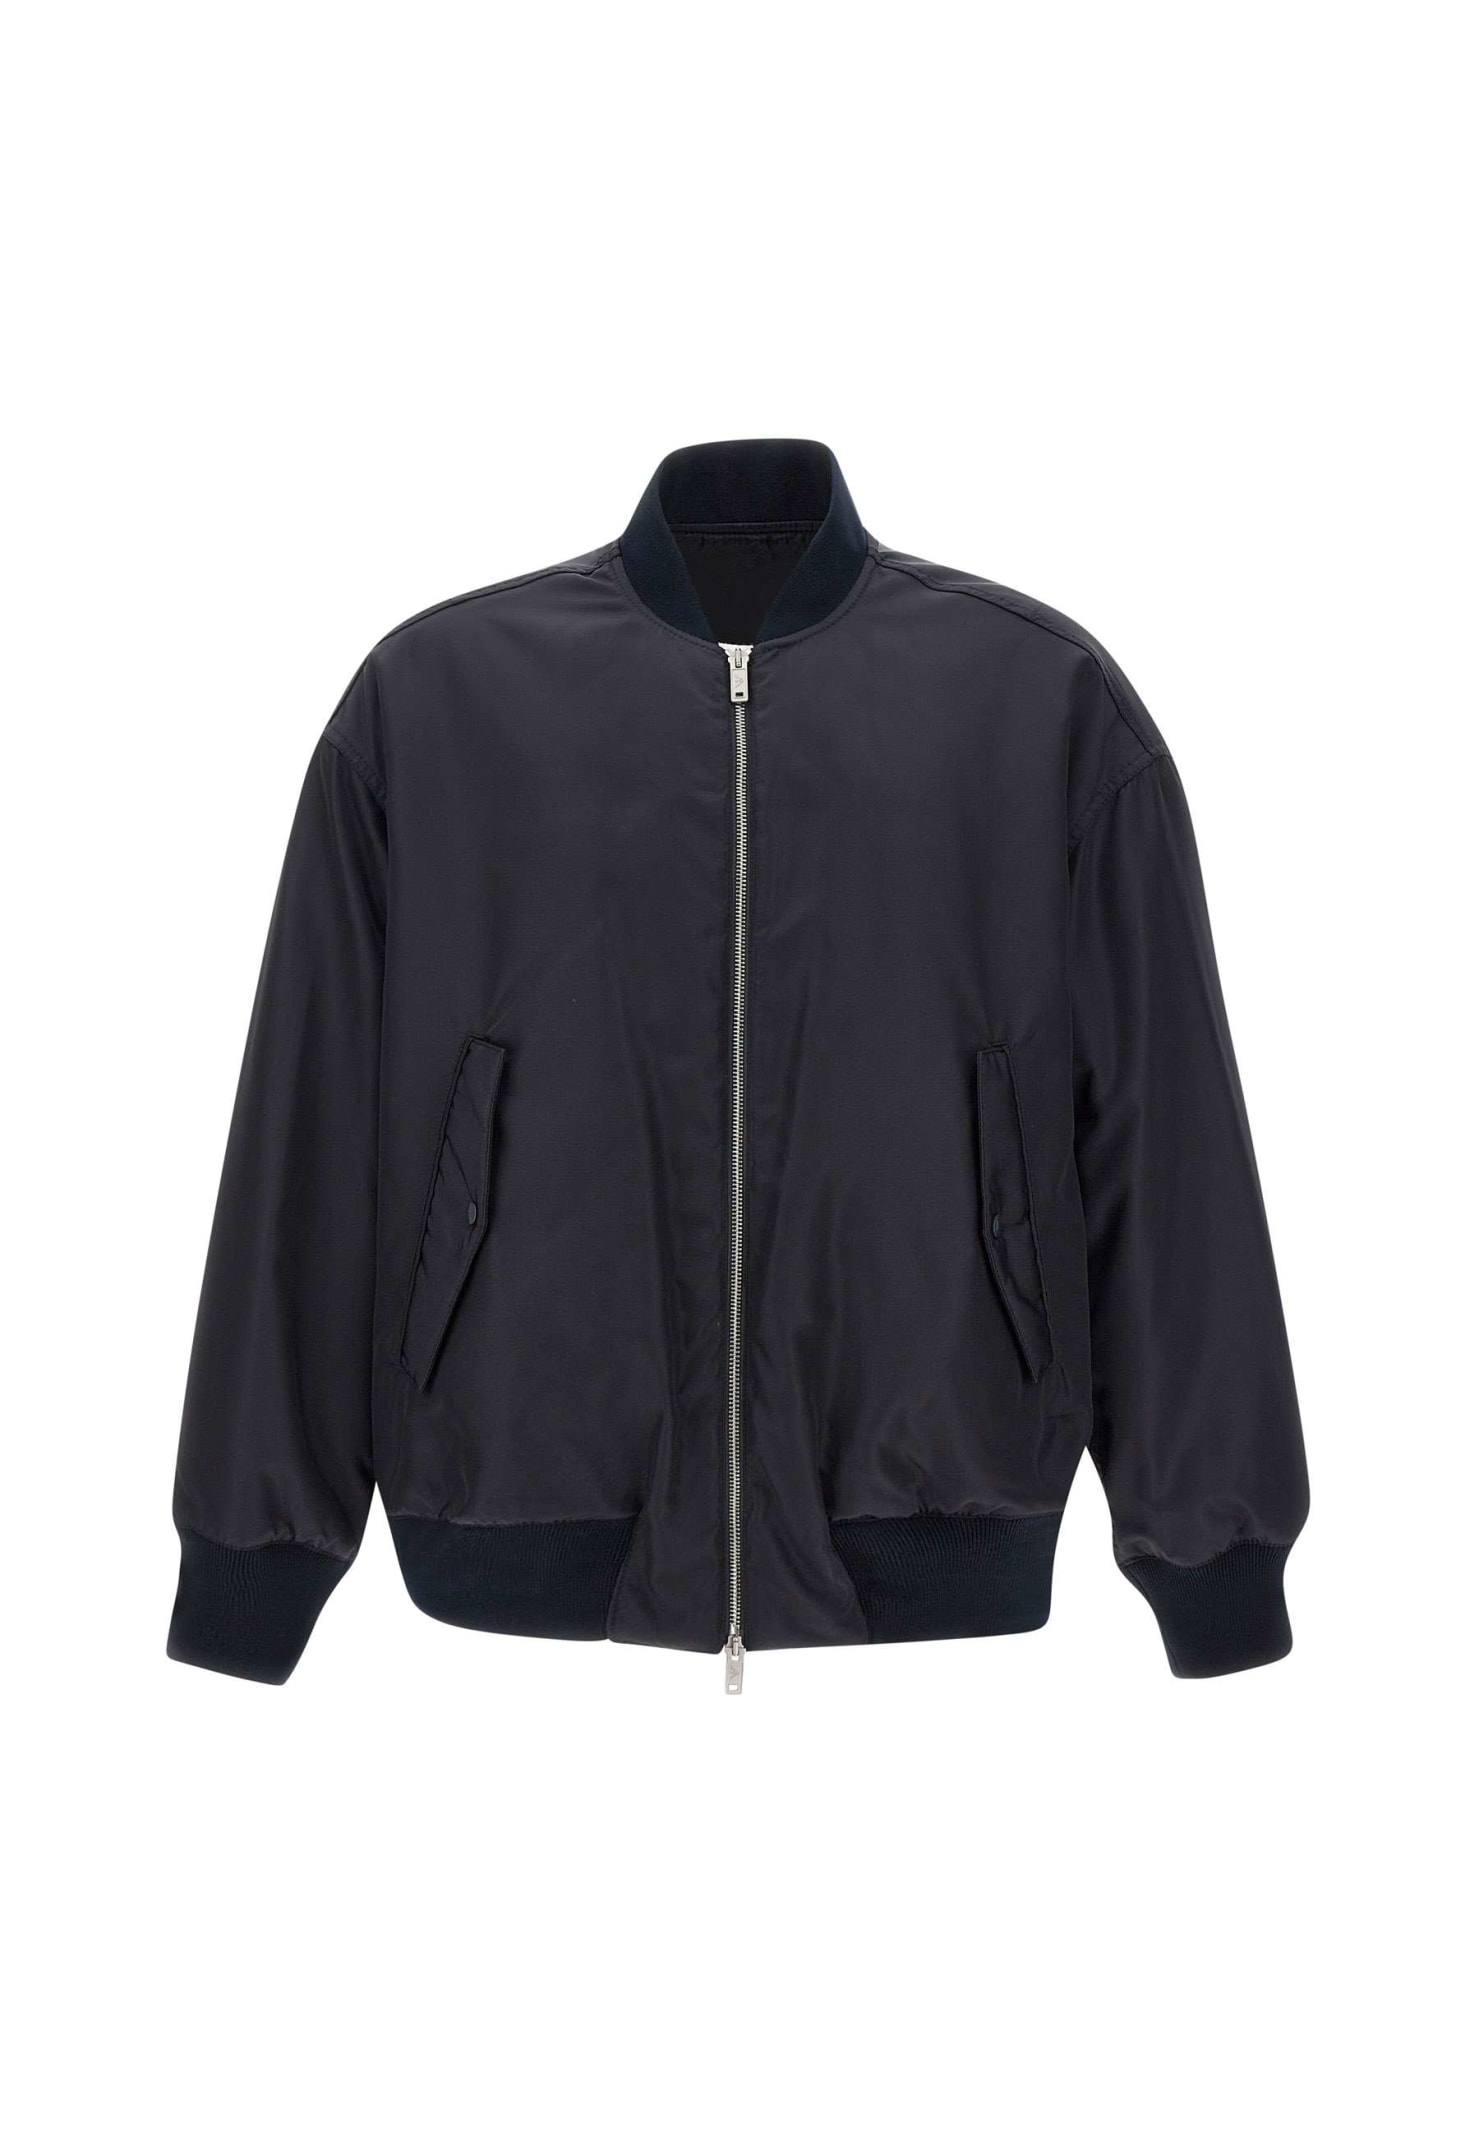 EMPORIO ARMANI SUSTAINABLE COLLECTION BOMBER JACKET